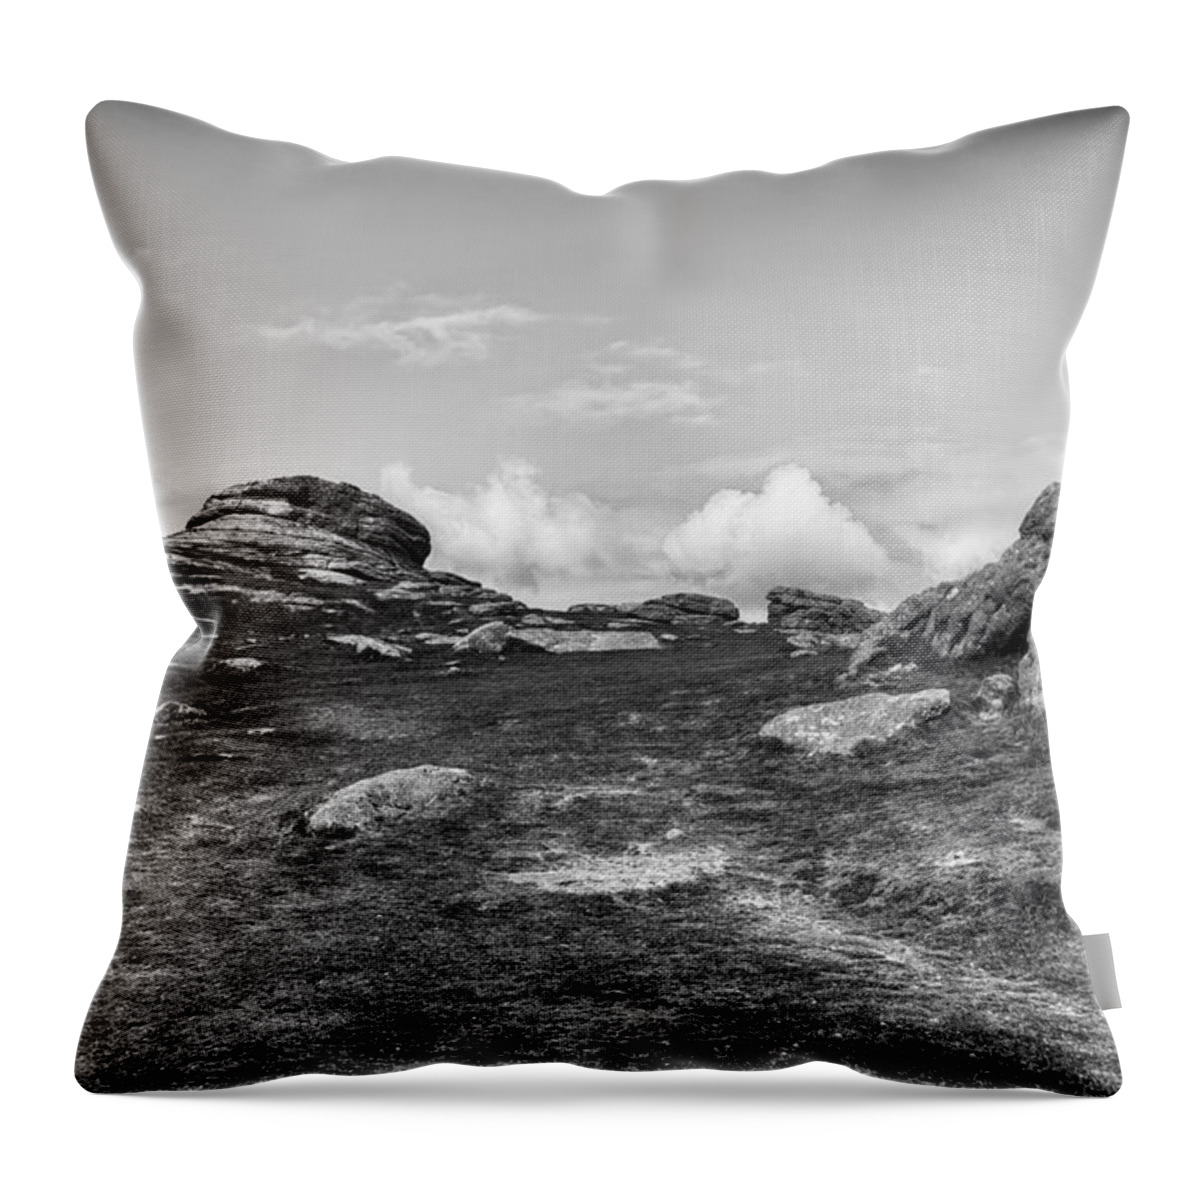  Throw Pillow featuring the photograph Haytor Rock by Howard Salmon